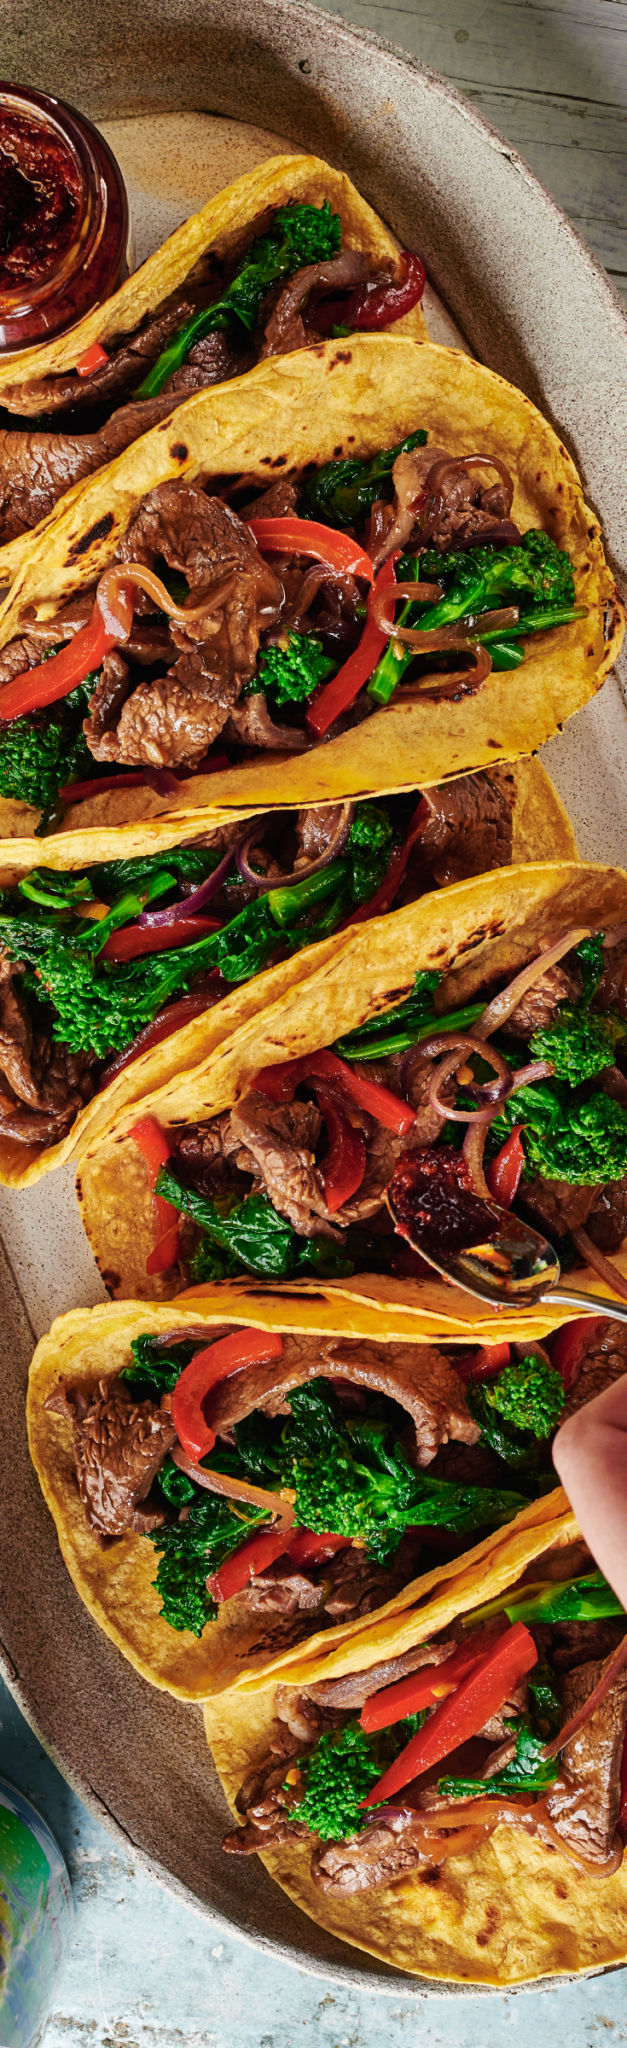 Korean Beef Tacos with Broccoli Rabe